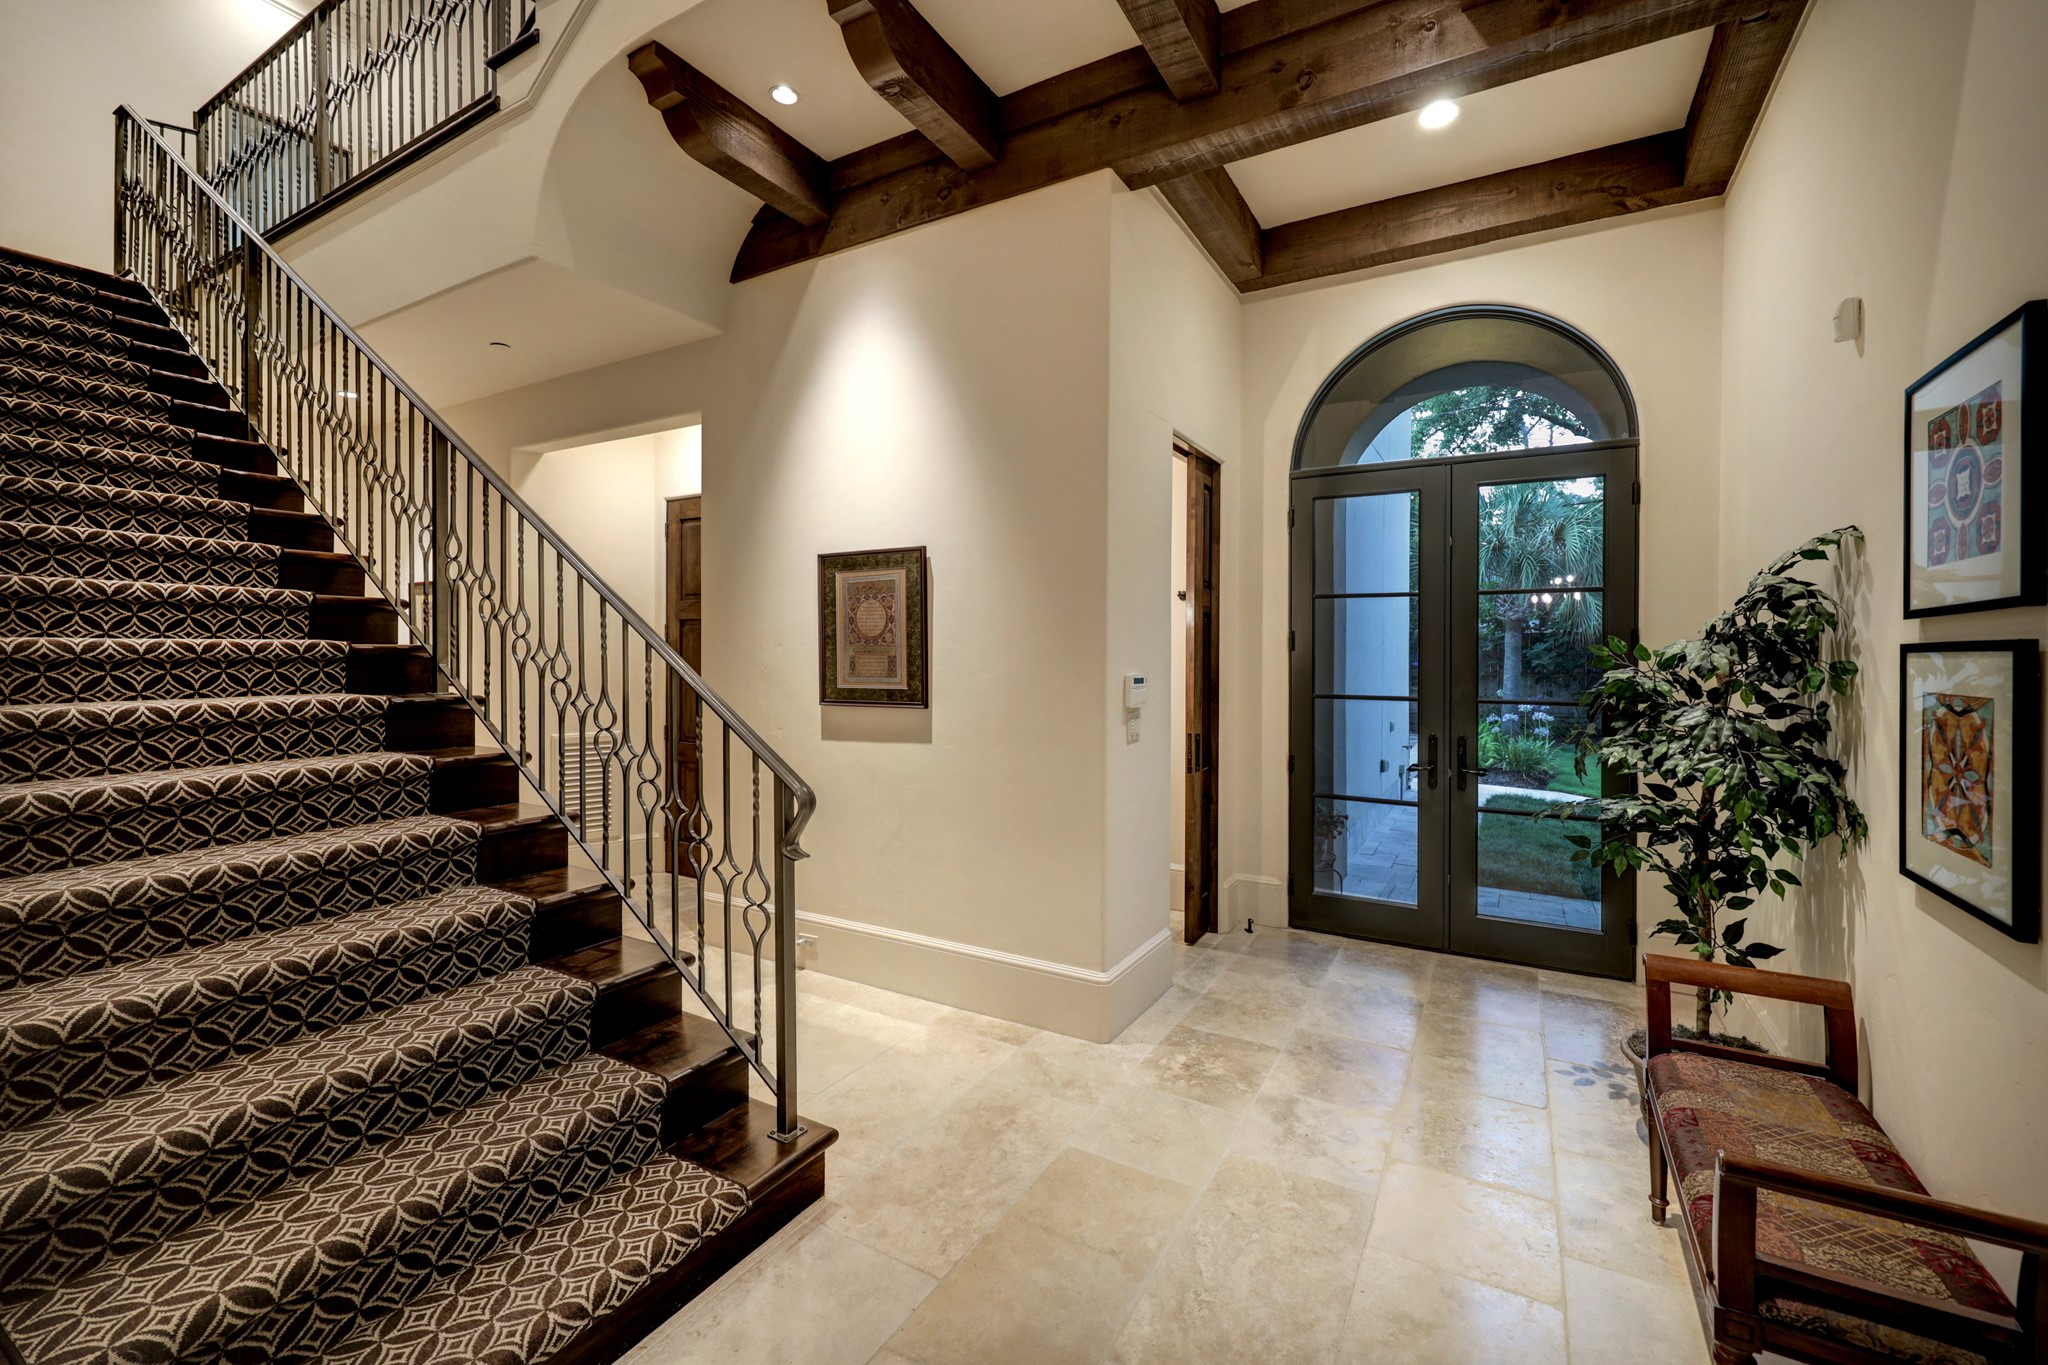 Second staircase with inlayed carpet leading to upstairs bedrooms, game room and theater